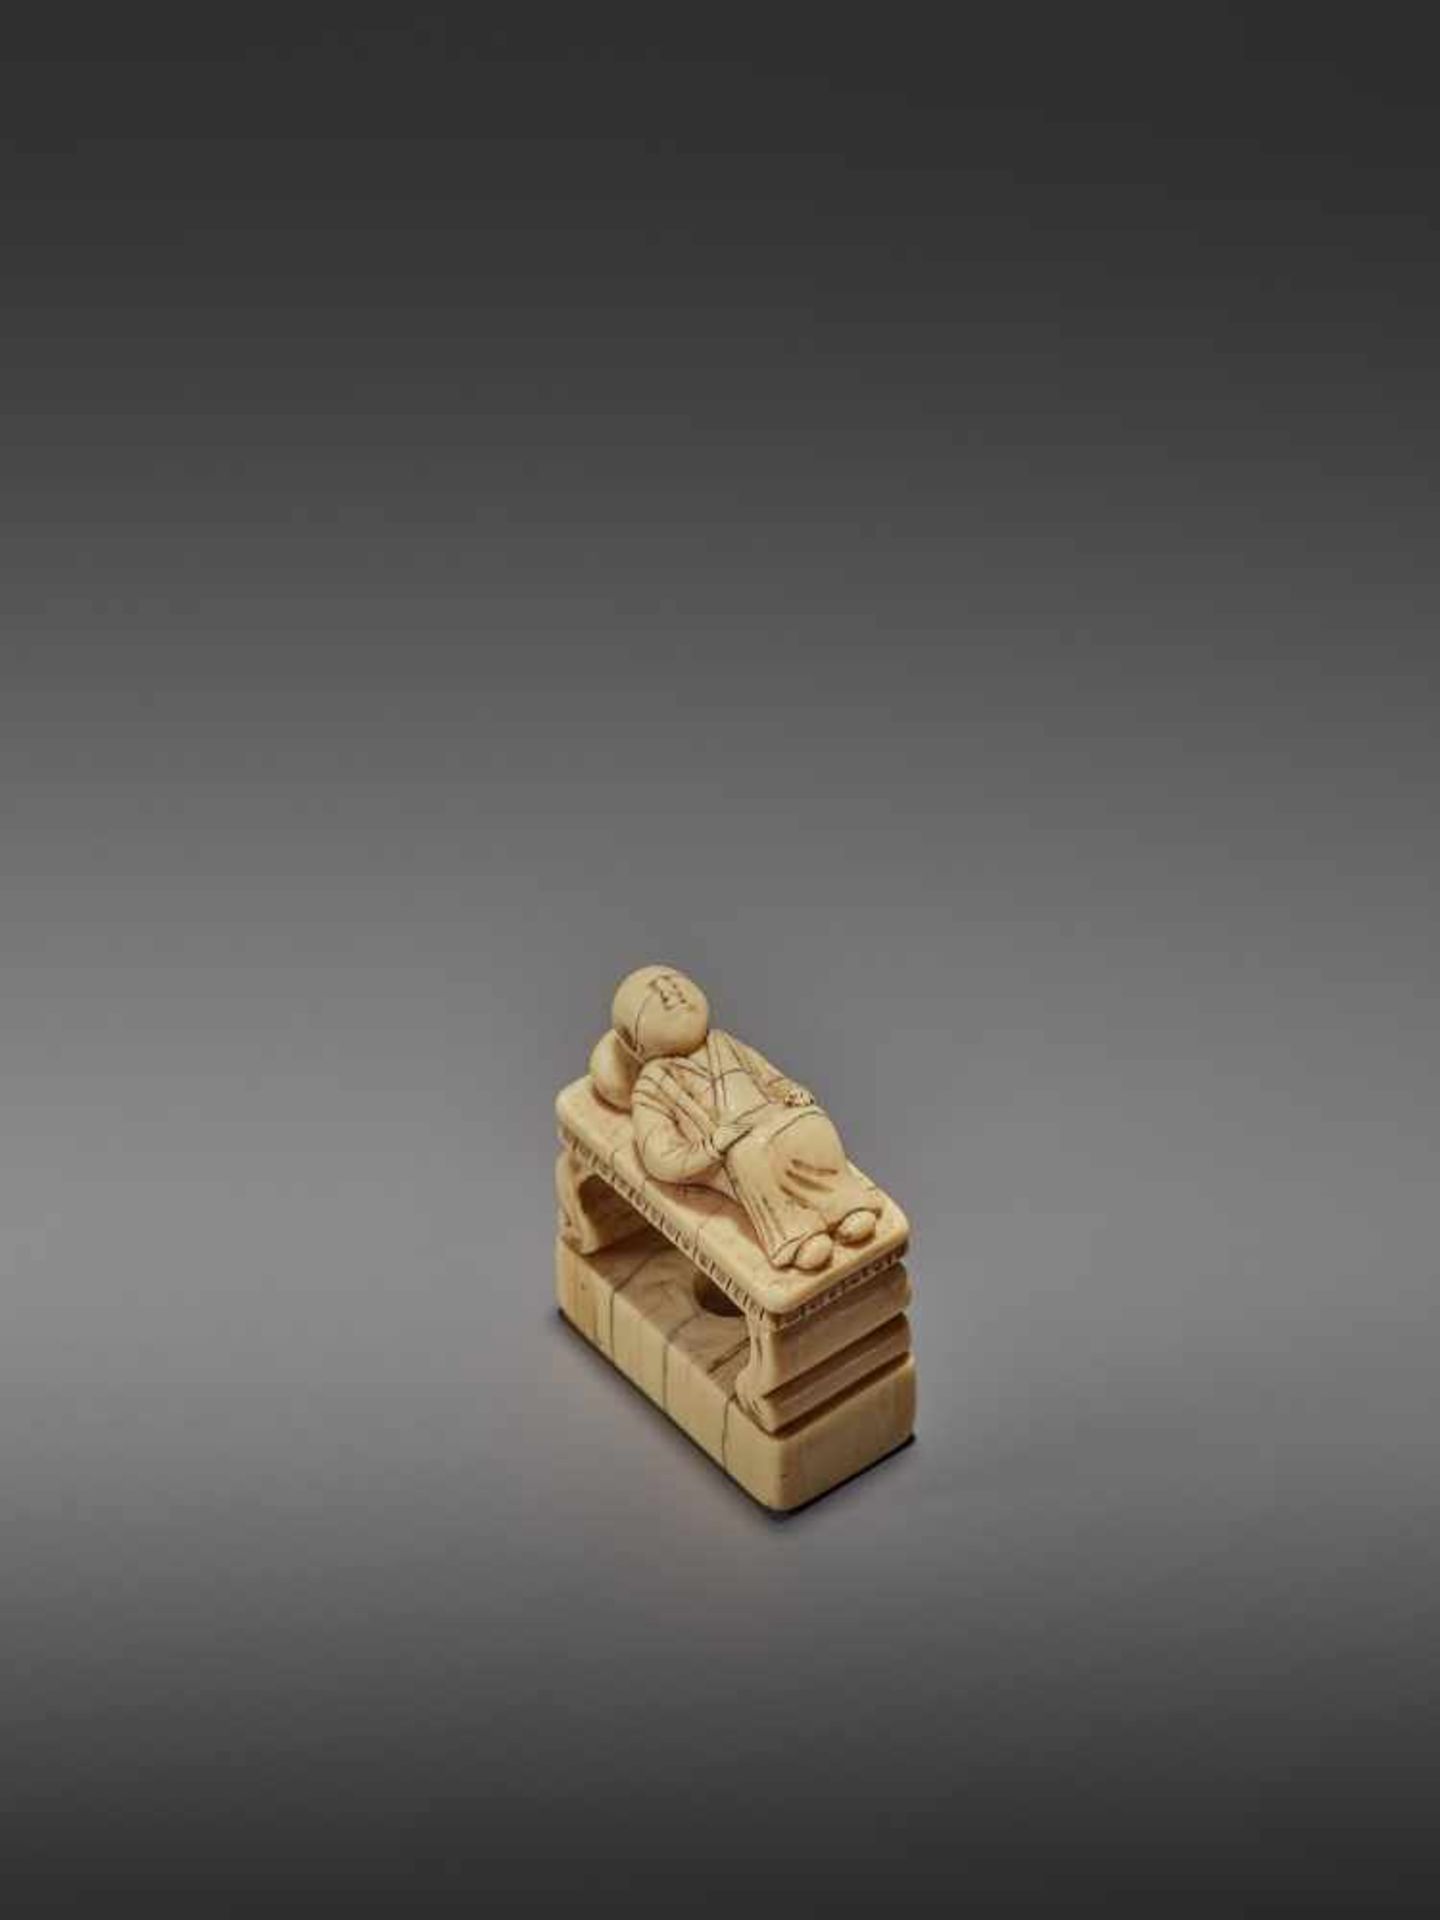 AN EARLY IVORY NETSUKE OF A CHINESE MAN SLEEPING ON AN OPIUM BED UnsignedJapan, early 18th - Image 7 of 11